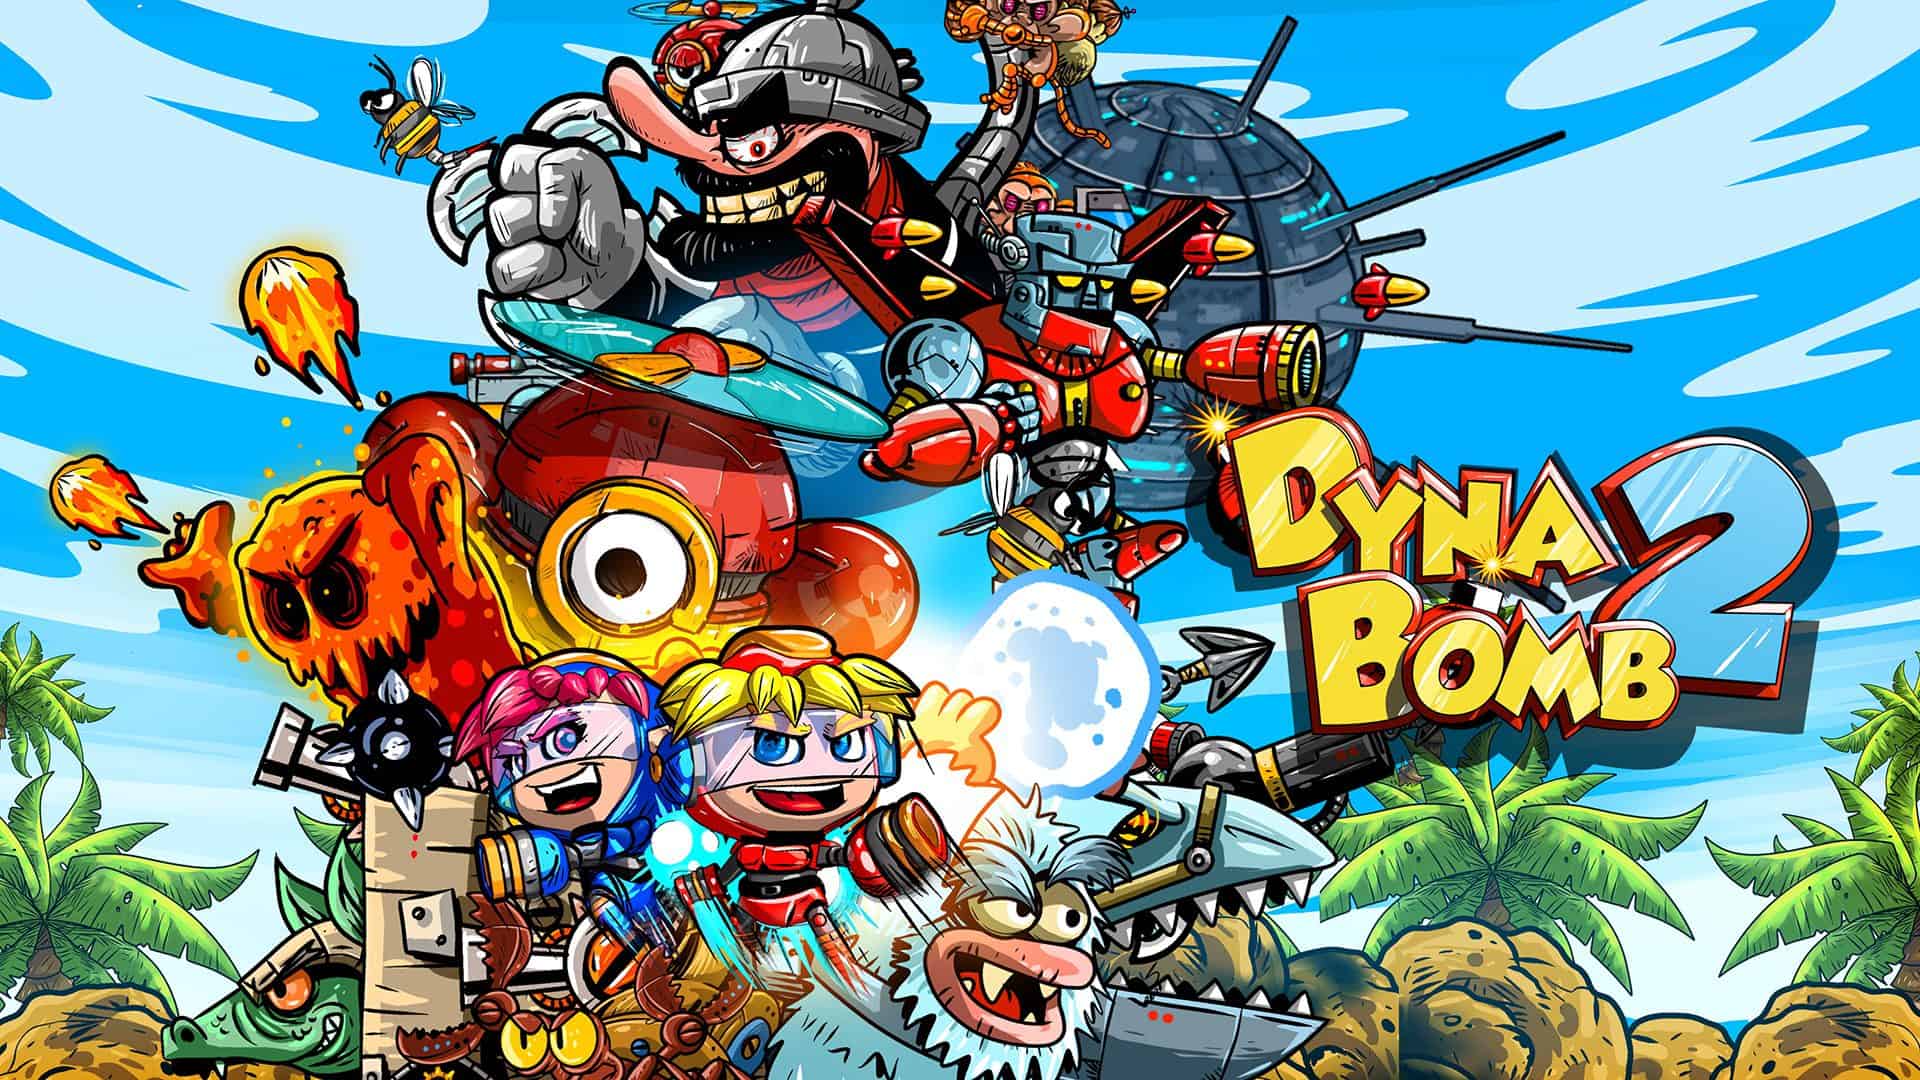 Dyna Bomb 2 game poster